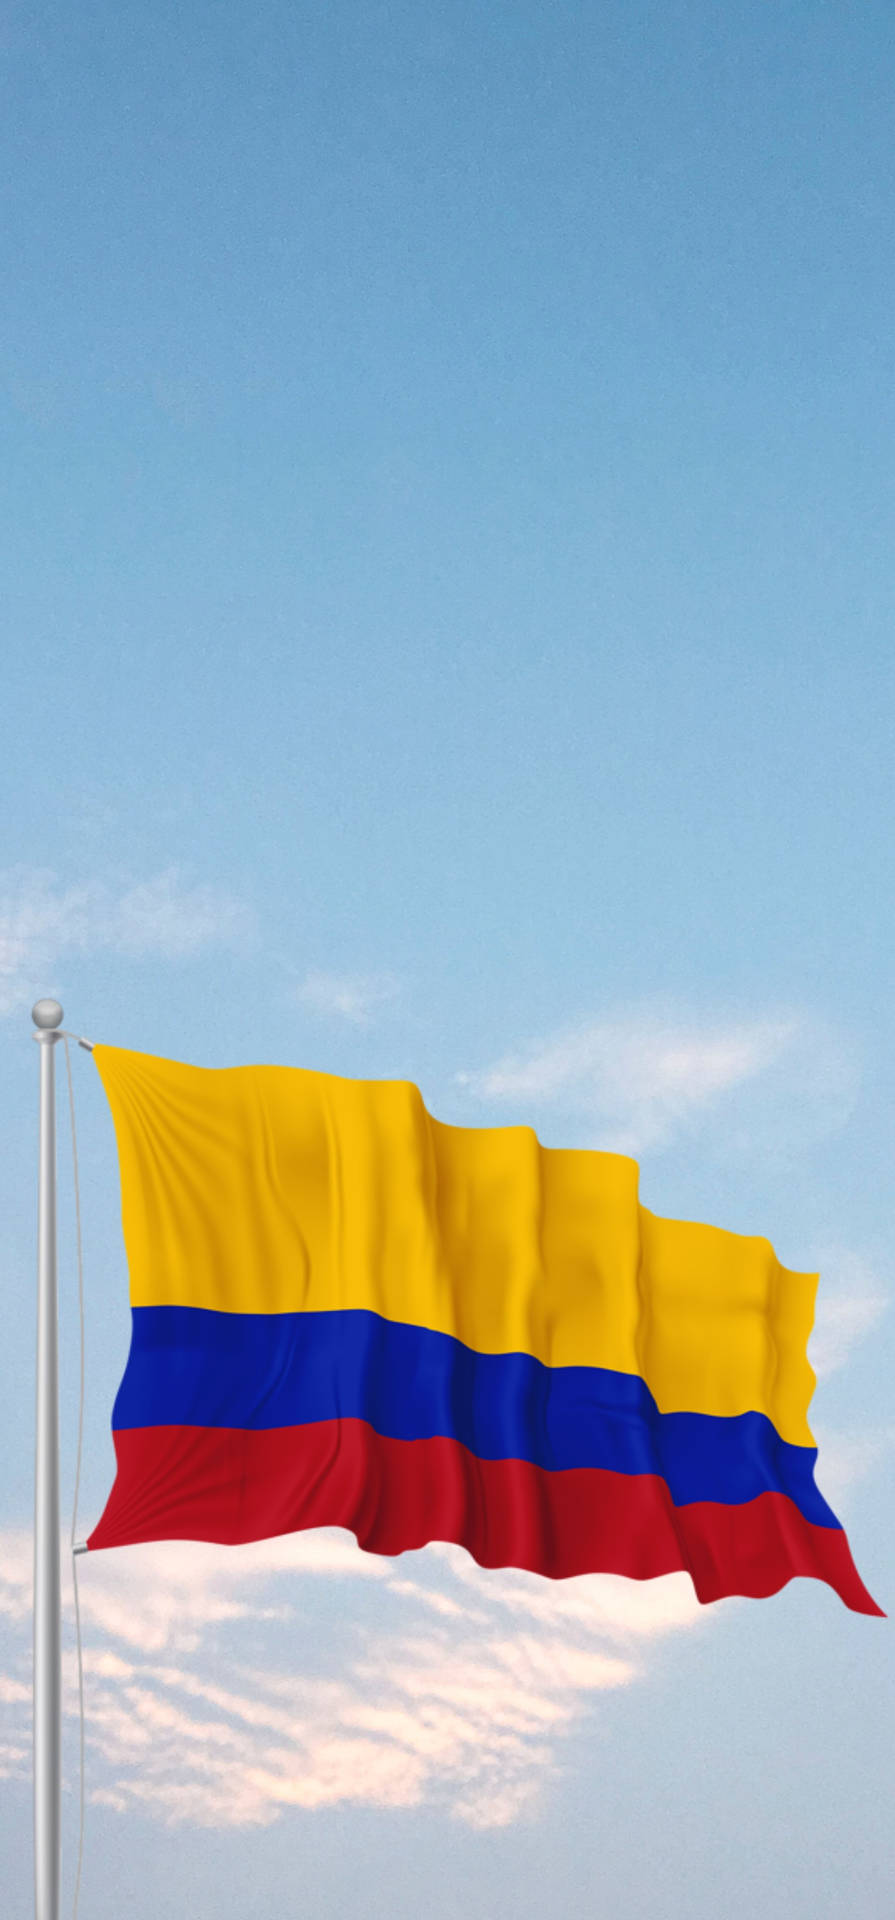 Colombia Flag In The Sky Wallpaper